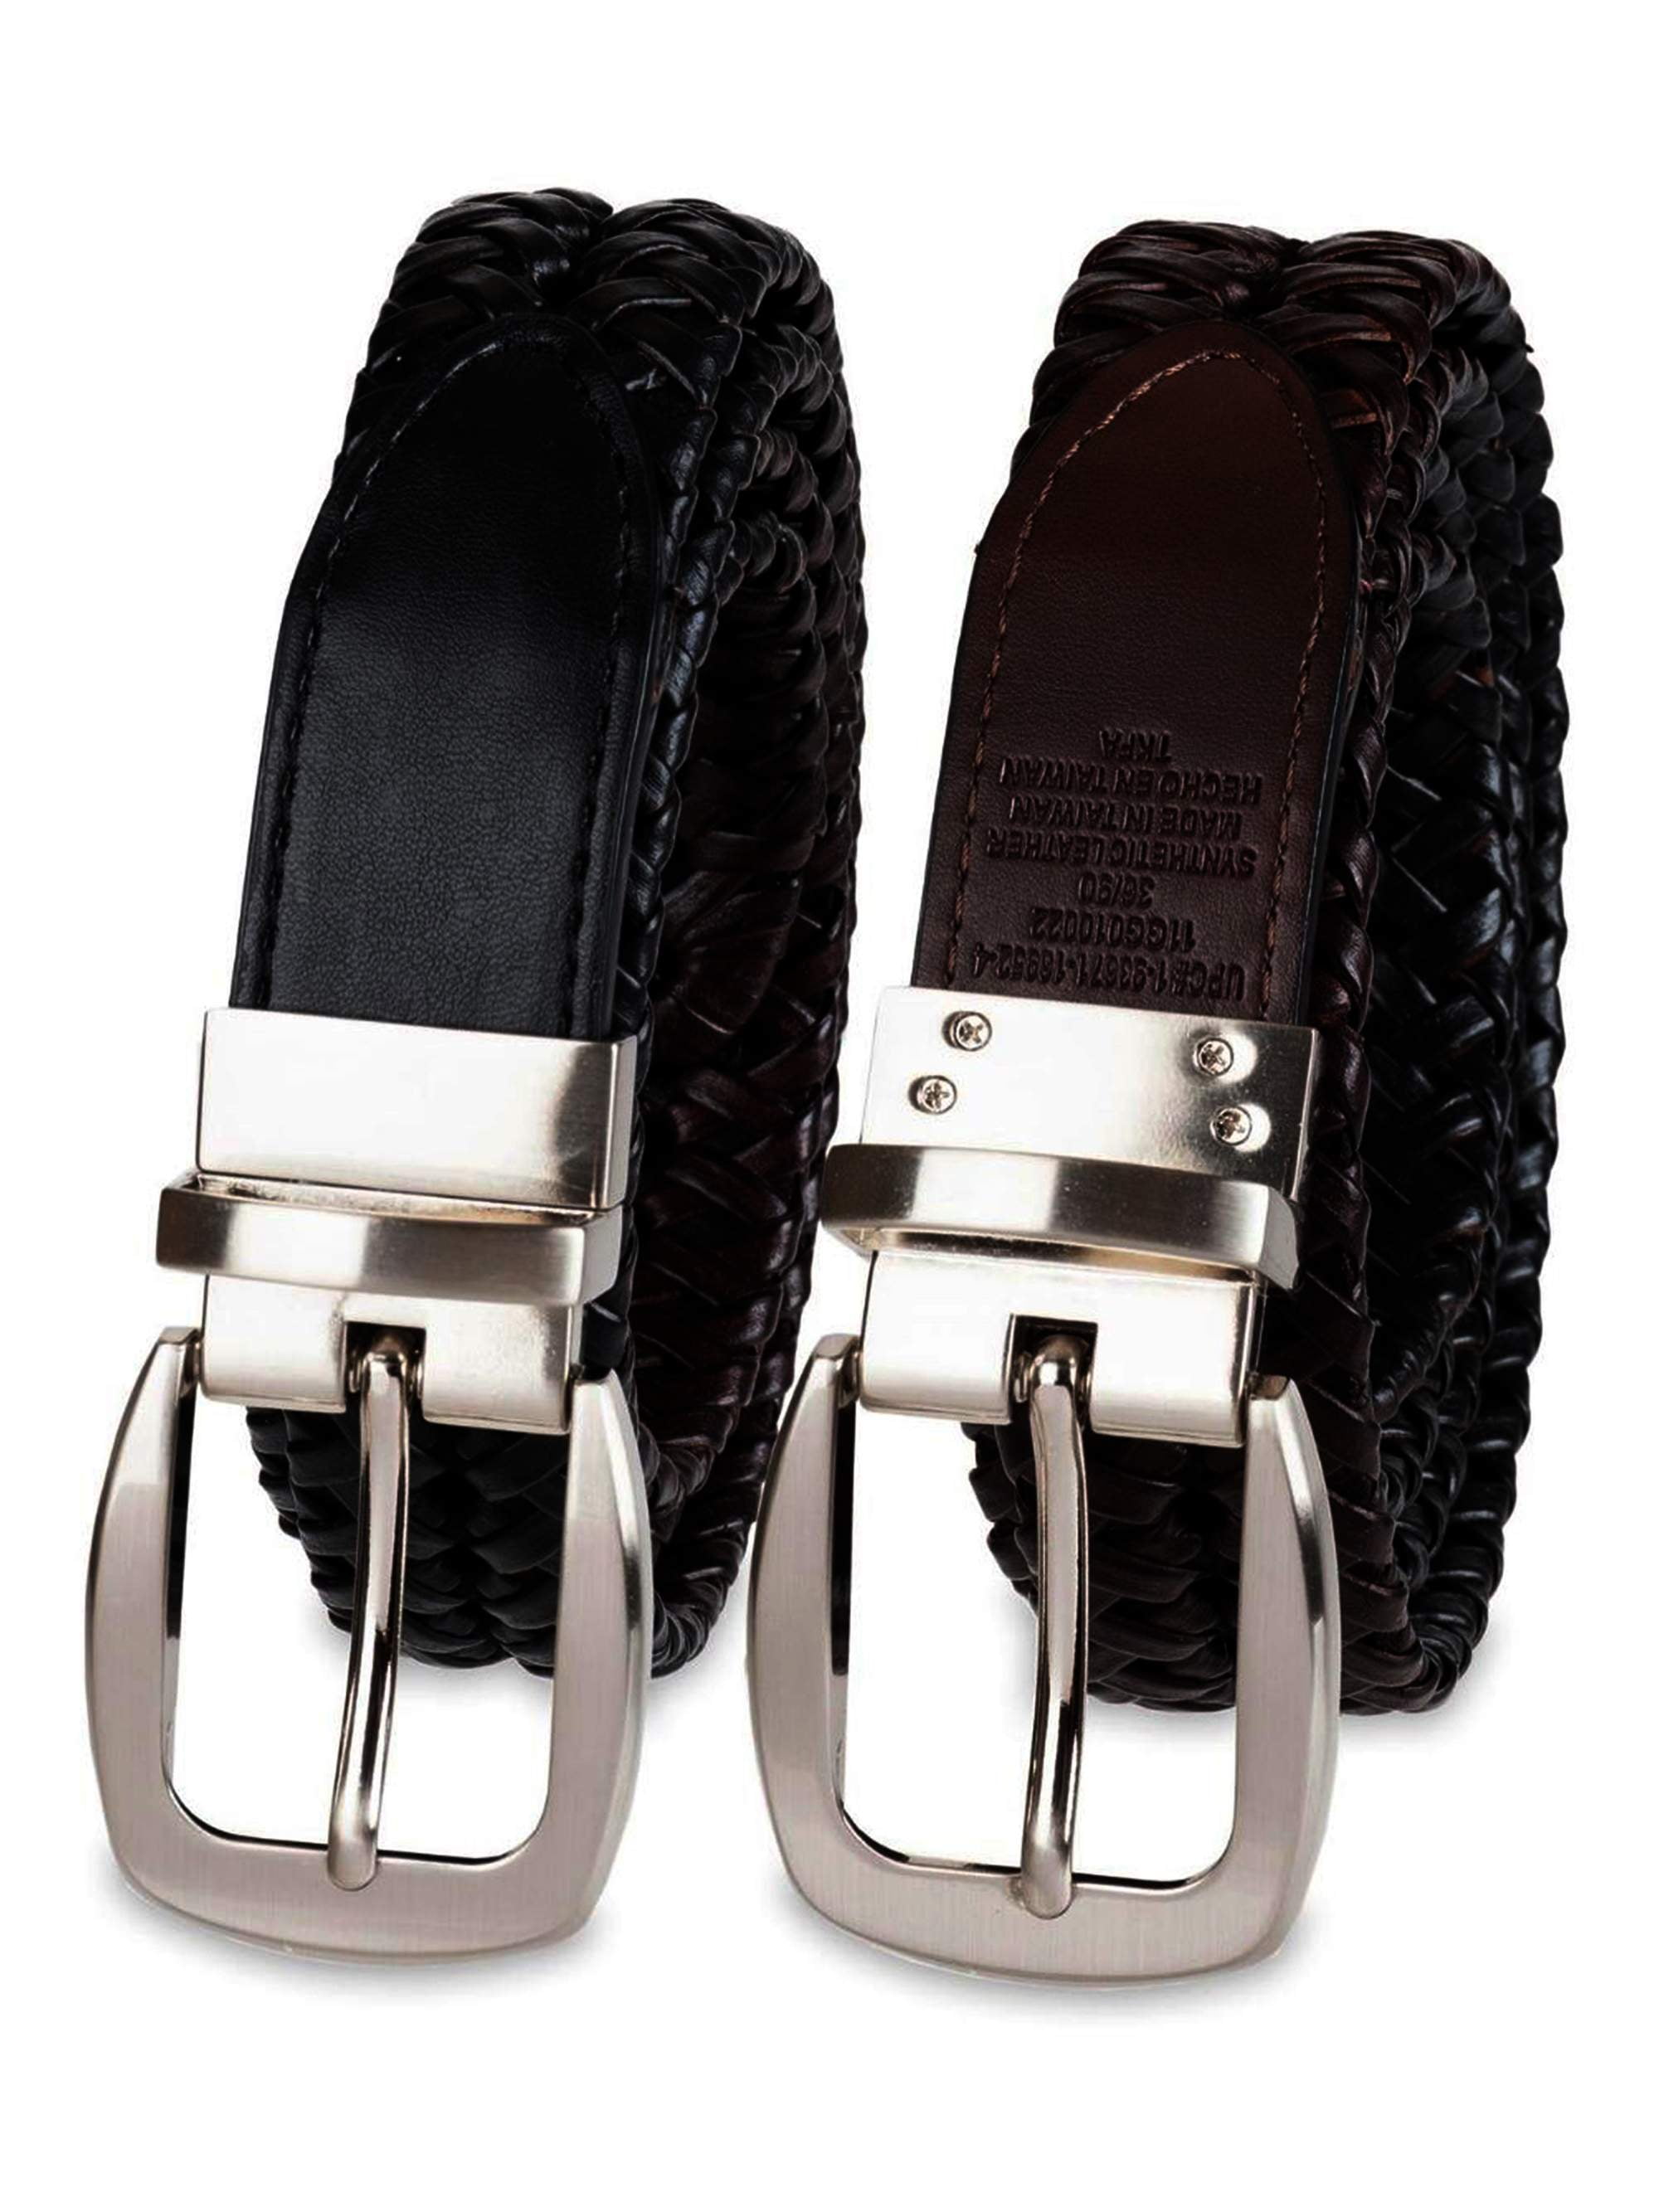 George Men's Reversible Black to Brown Braided Belt With Big & Tall Sizes 